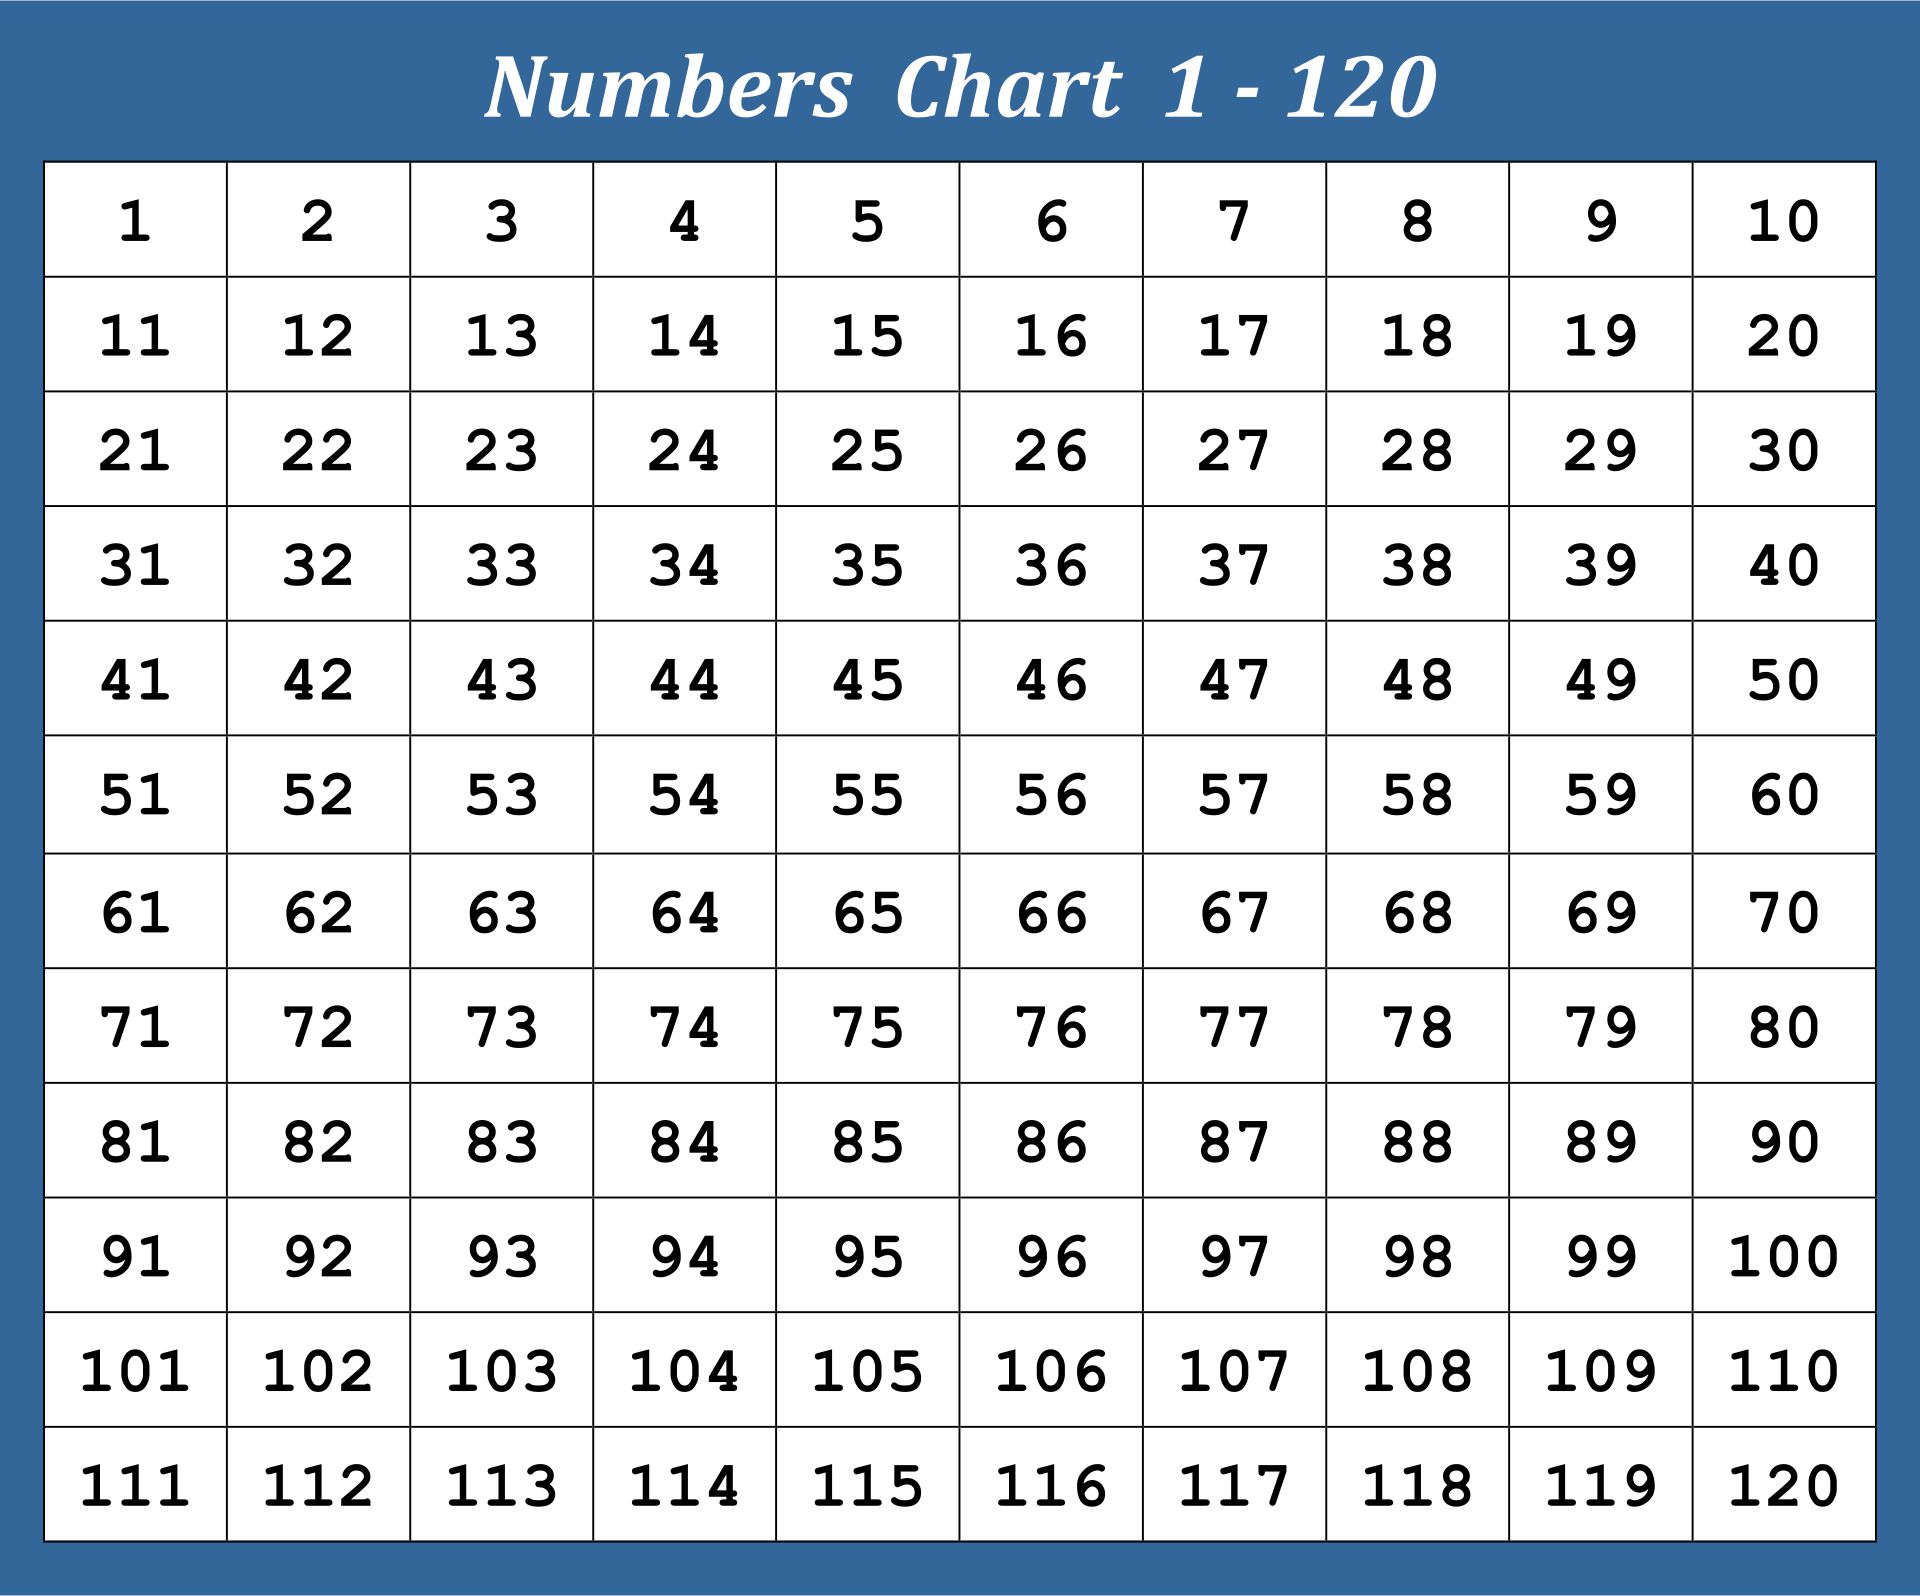 6 Best Images of Printable Blank Chart 1 120 Blank 120 Chart